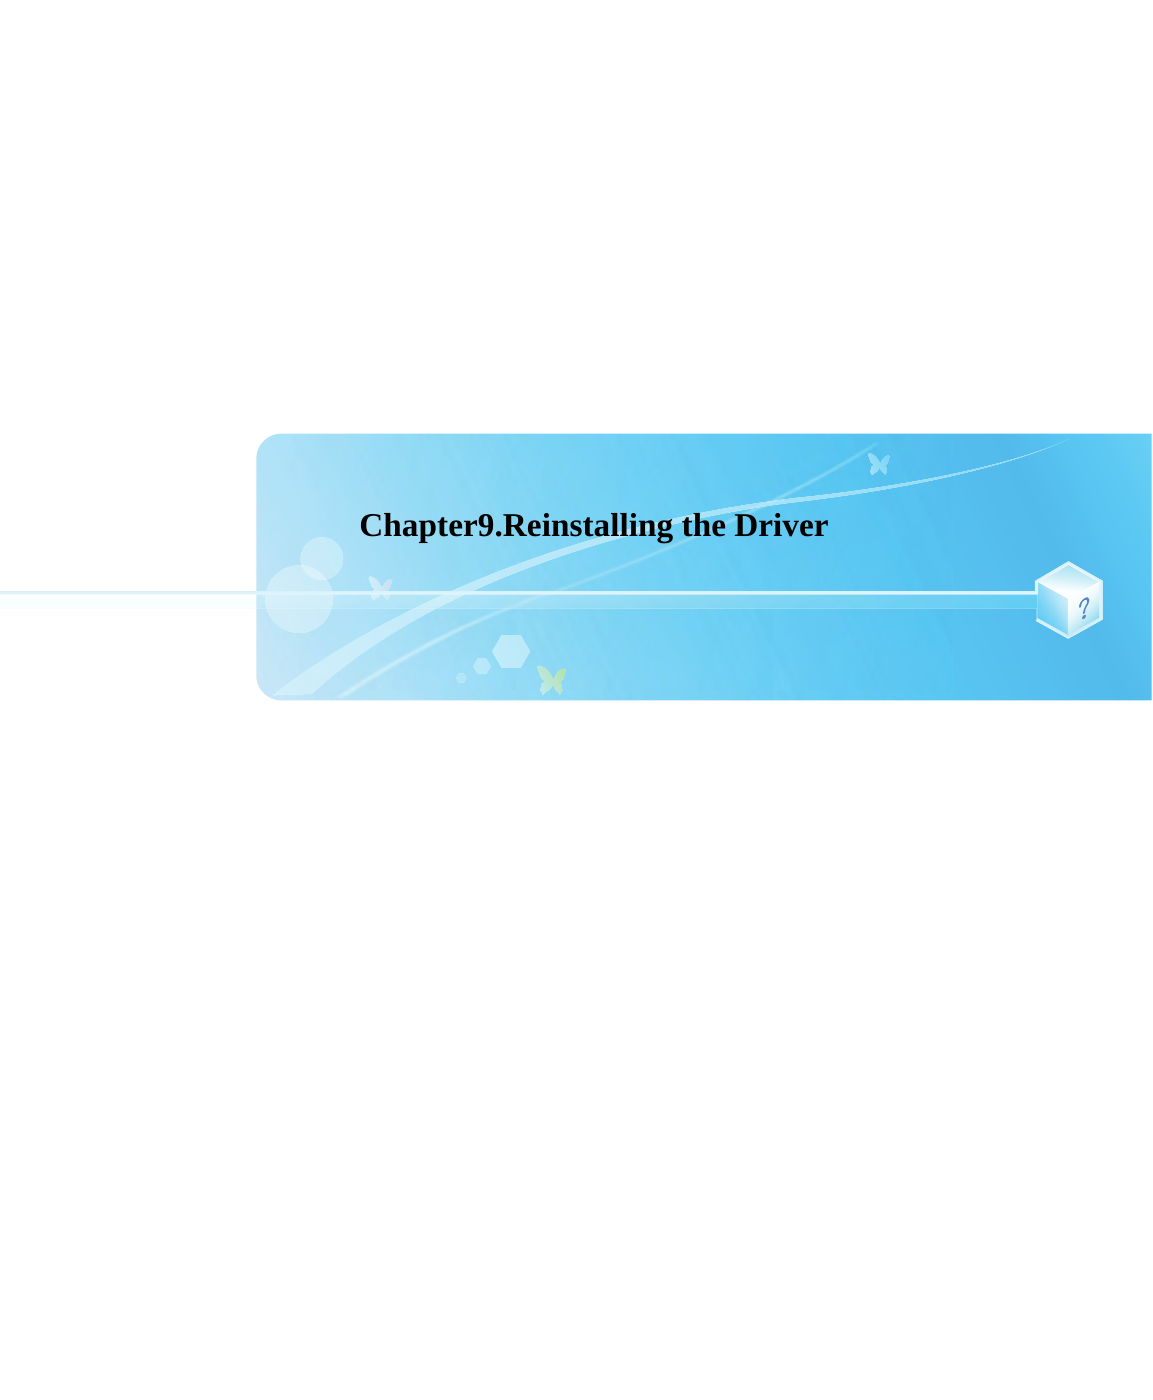 Chapter9.Reinstalling the Driver